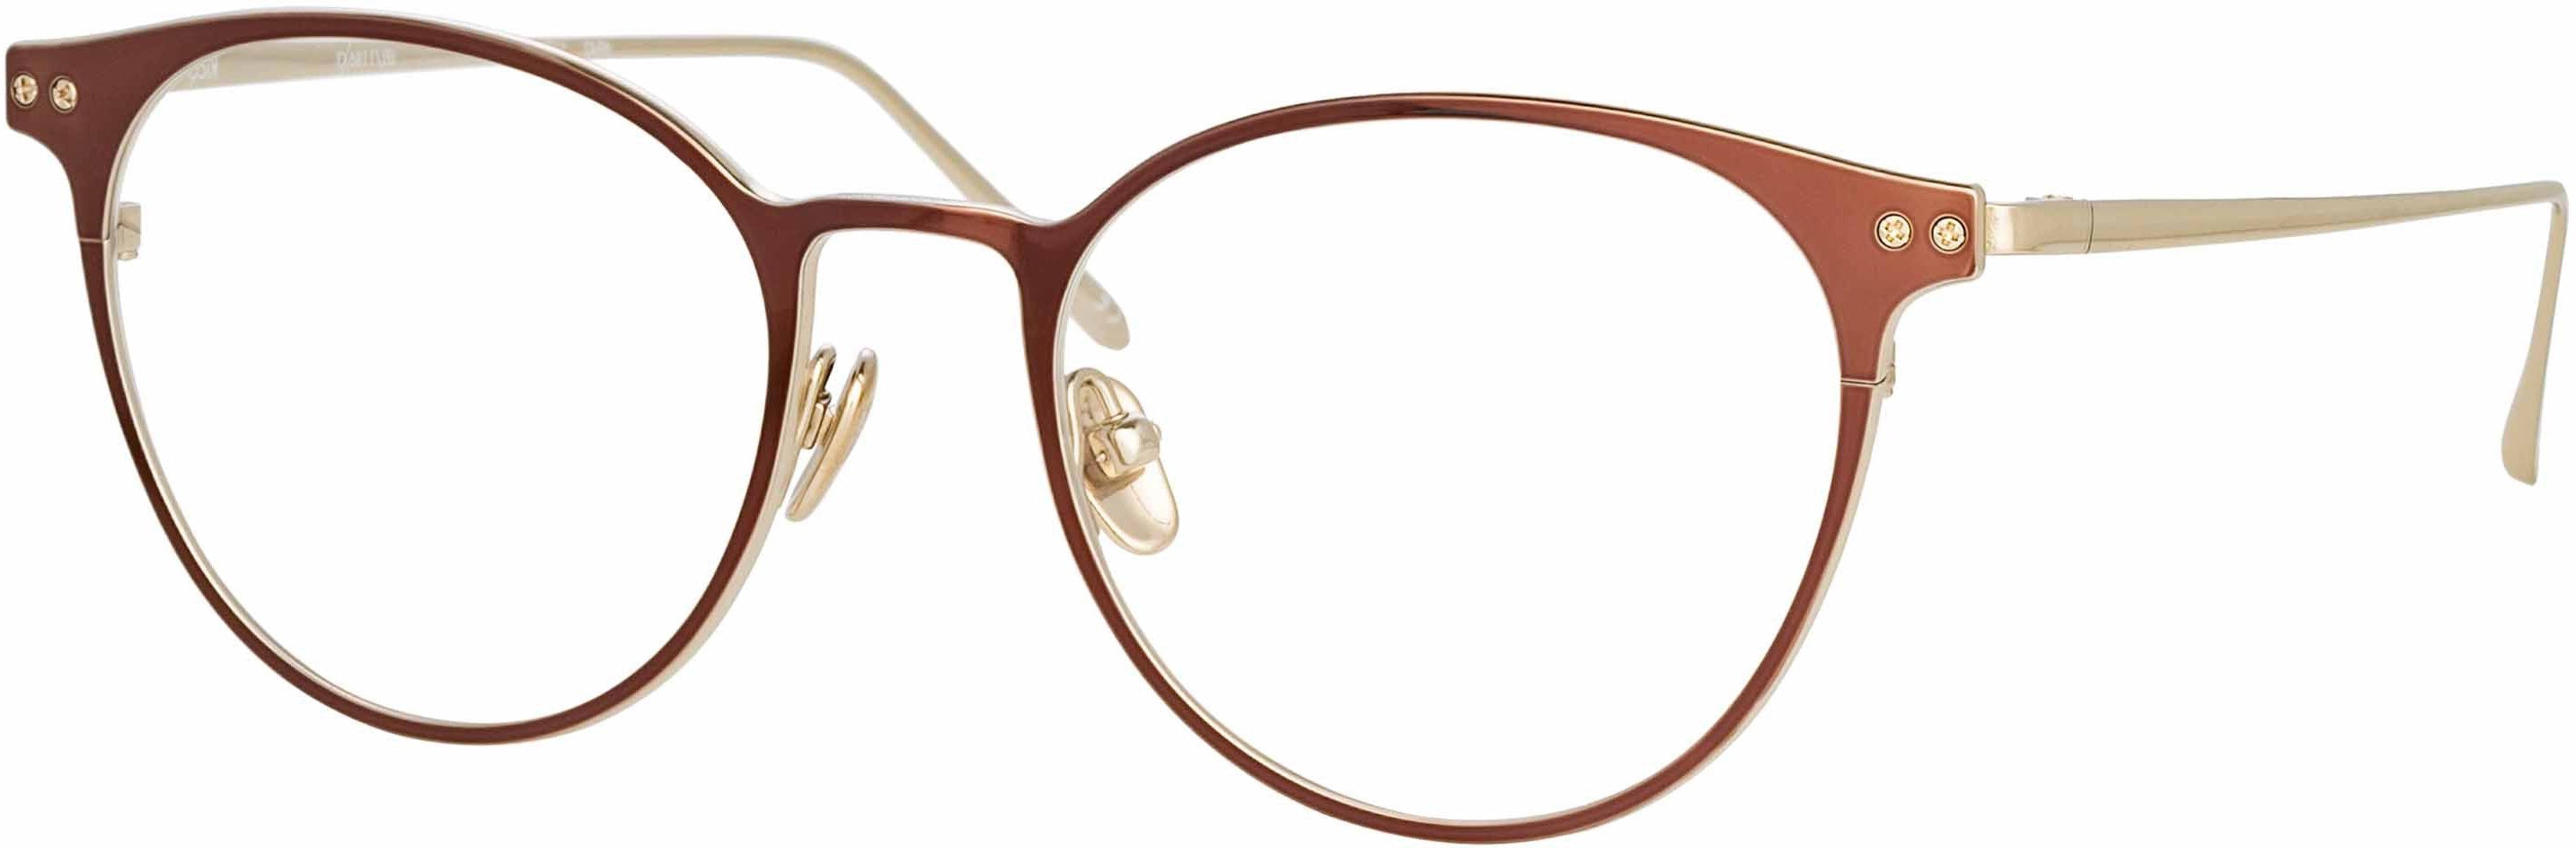 Color_LFL1186C3OPT - Ricci Cat Eye Optical Frame in Light Gold and Brown